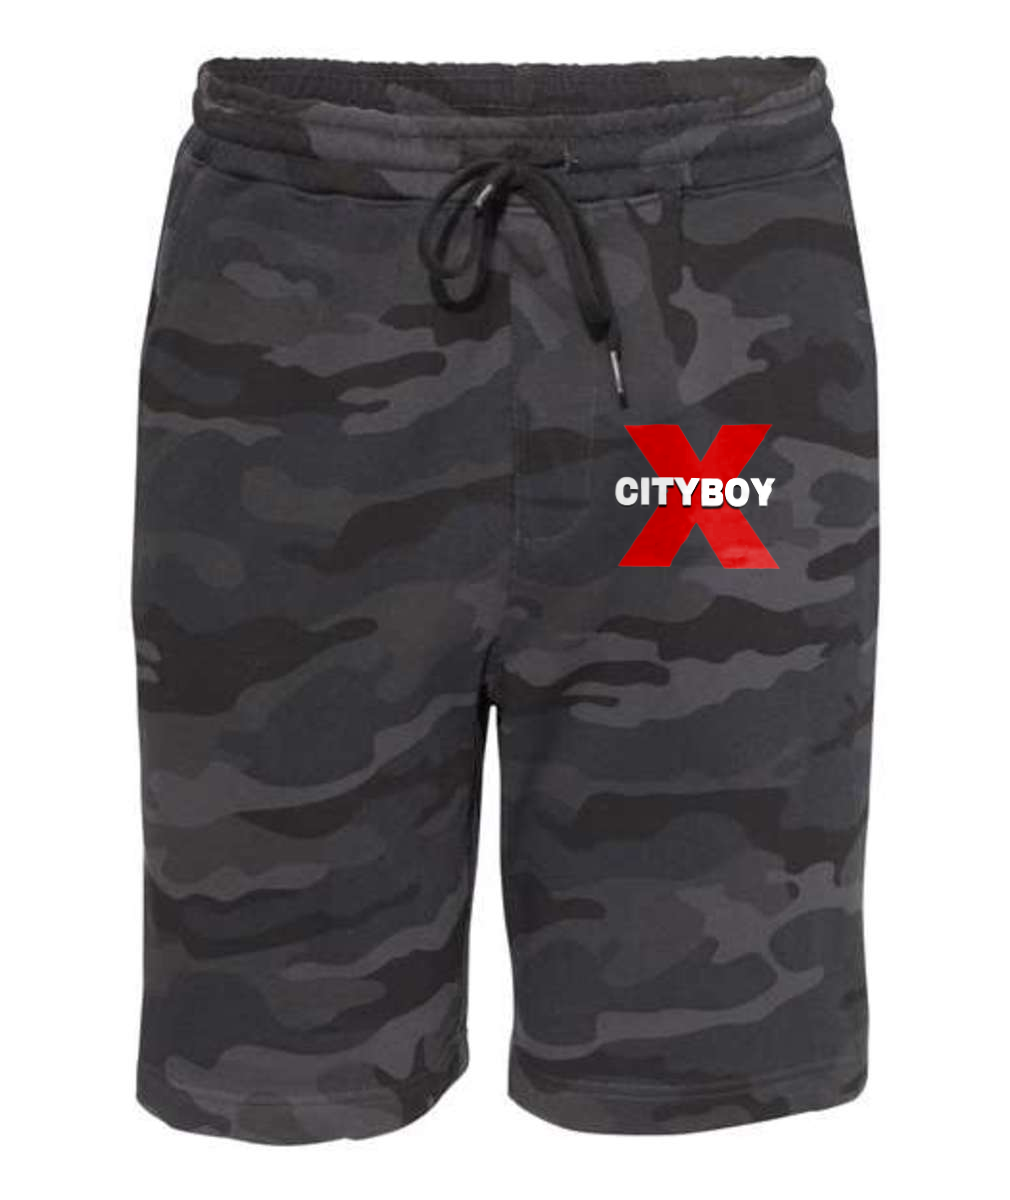 CITYBOY print Independent Trading Co. - Midweight Fleece Shorts or Similar